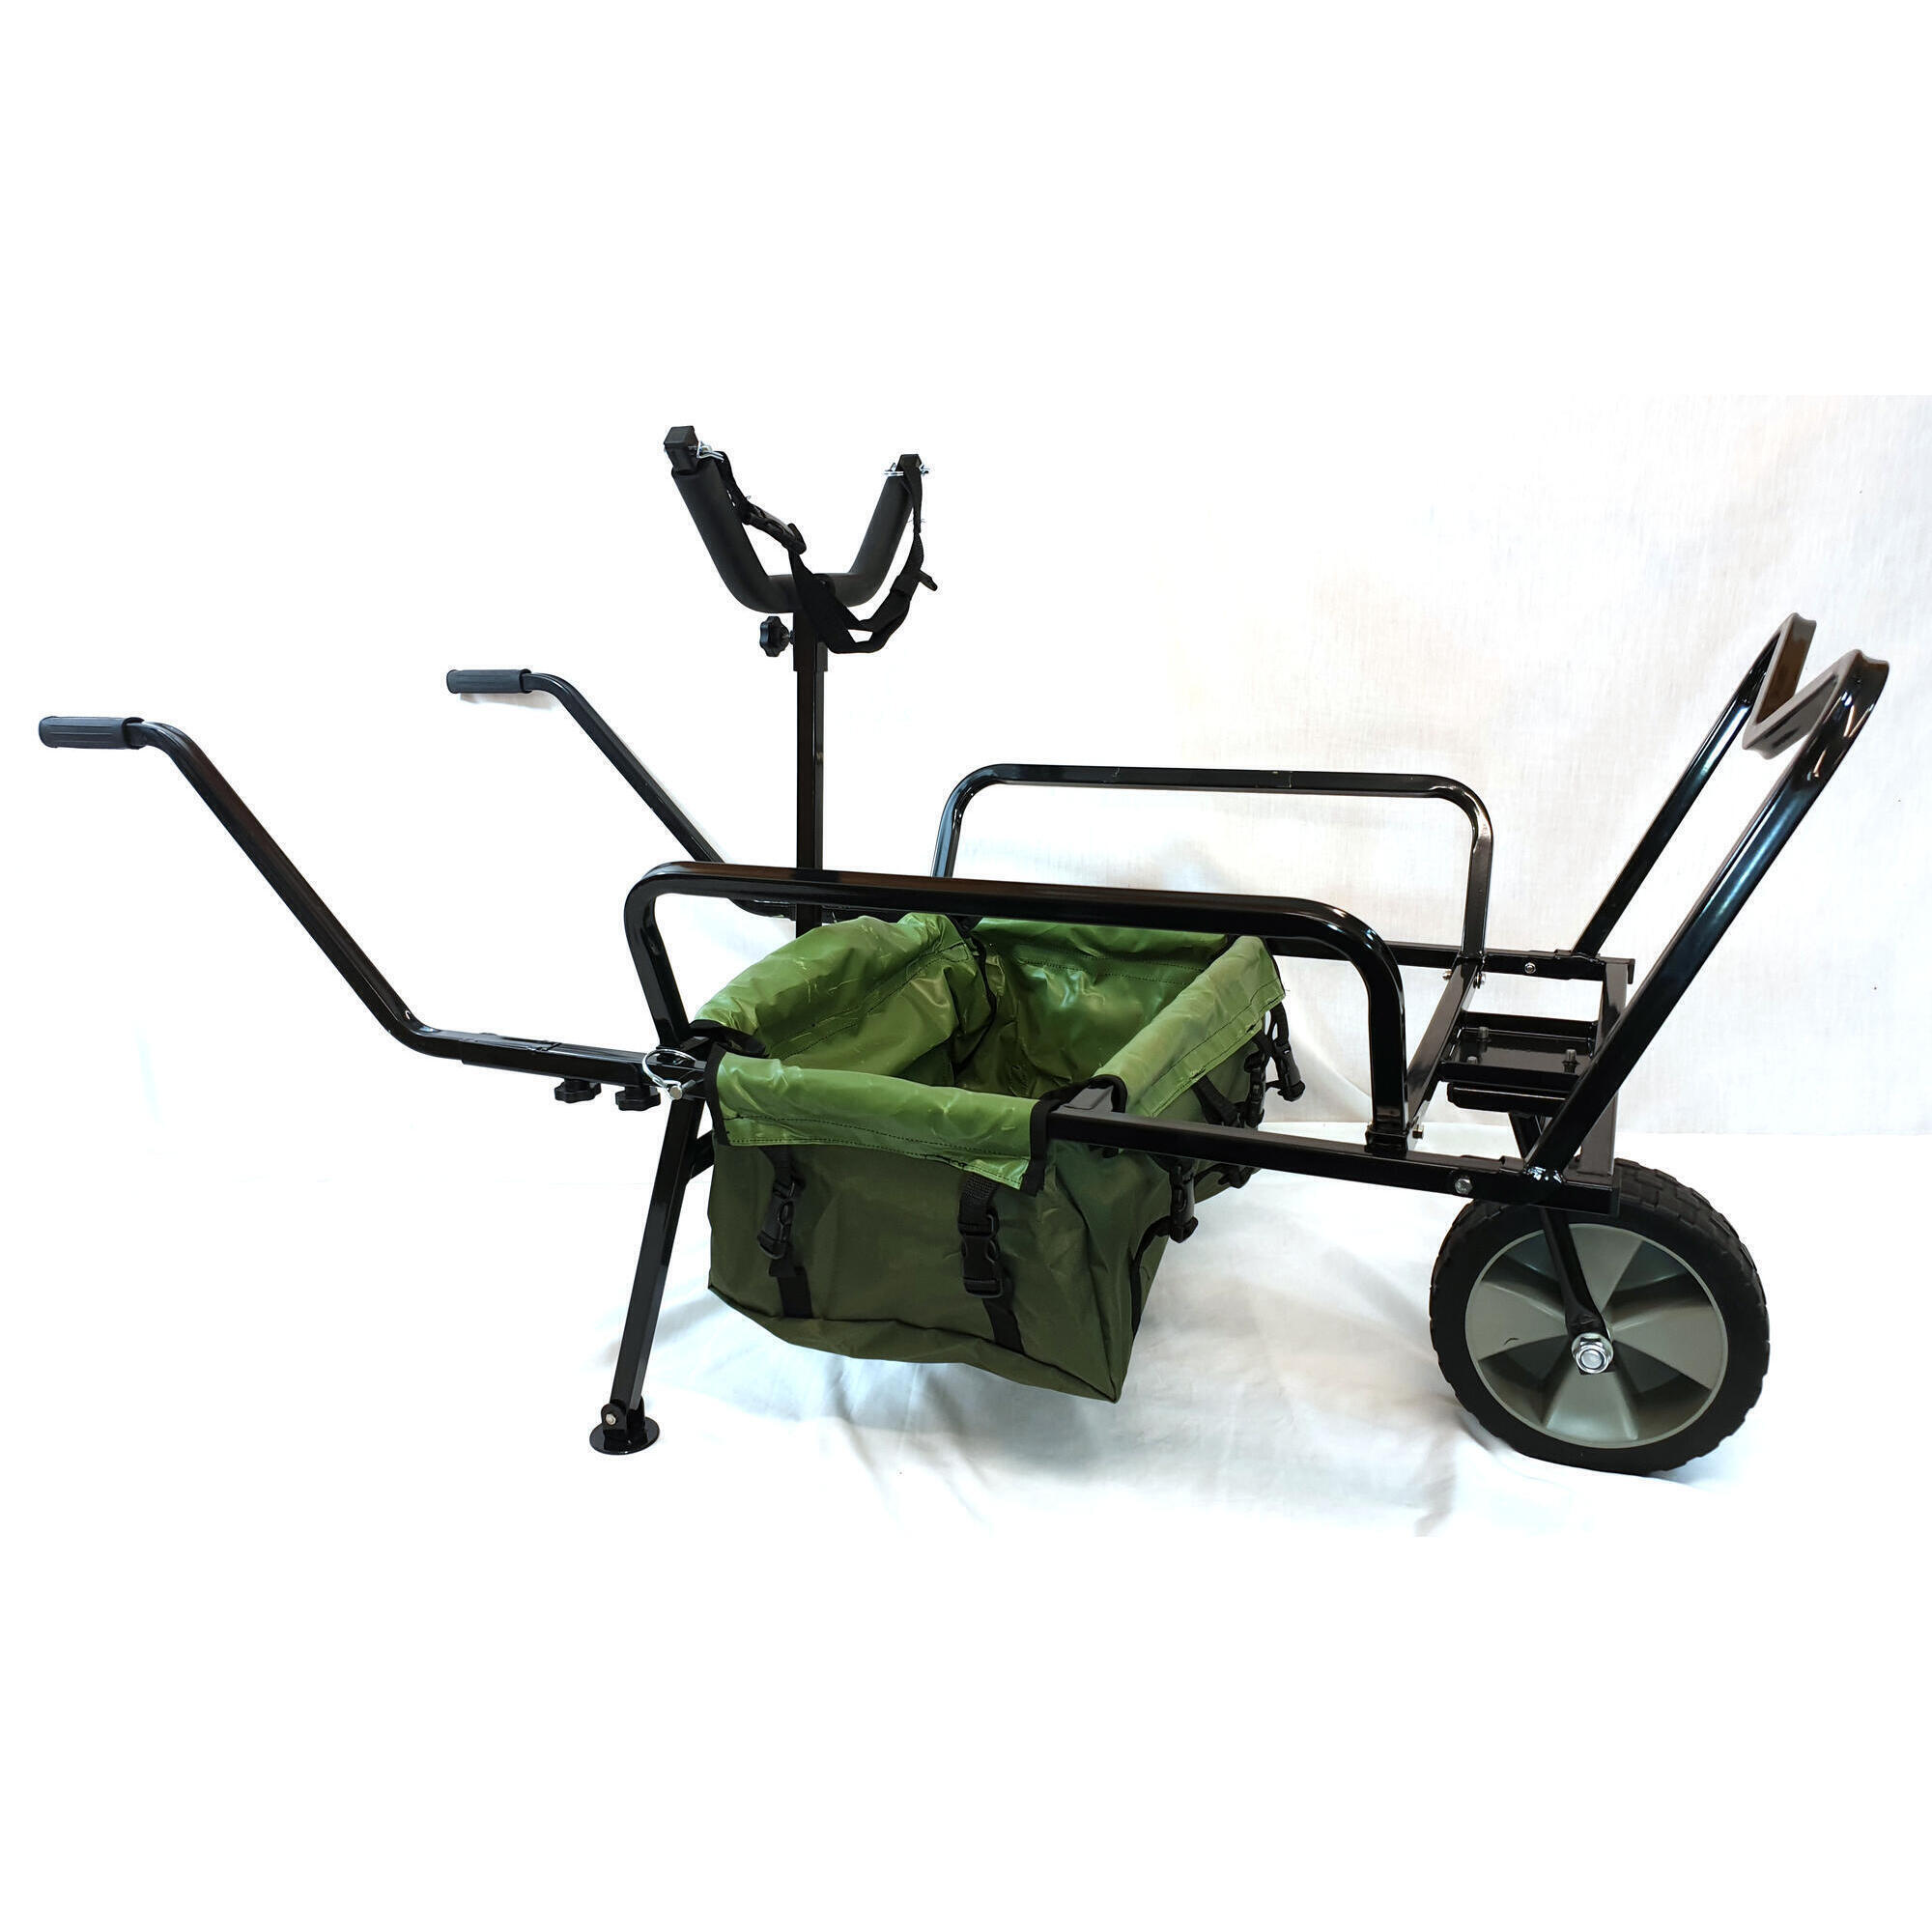 BISON One wheel fishing camping barrow with Y Bar